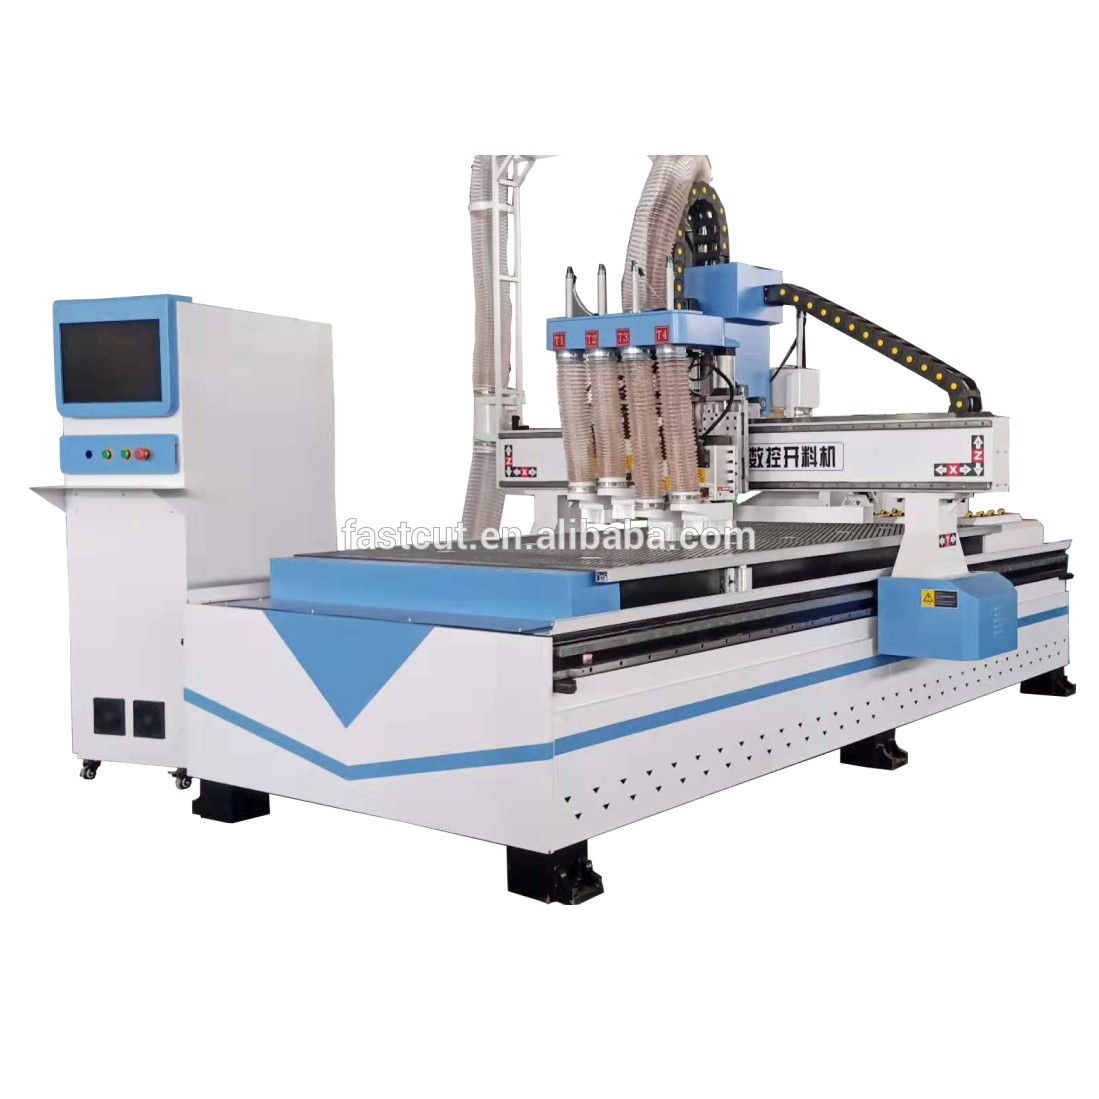 Cnc atc/ATC 3D CNC Router on Promotion/multi-heads Pneumatic ATC 1325 cutting engraving cnc router